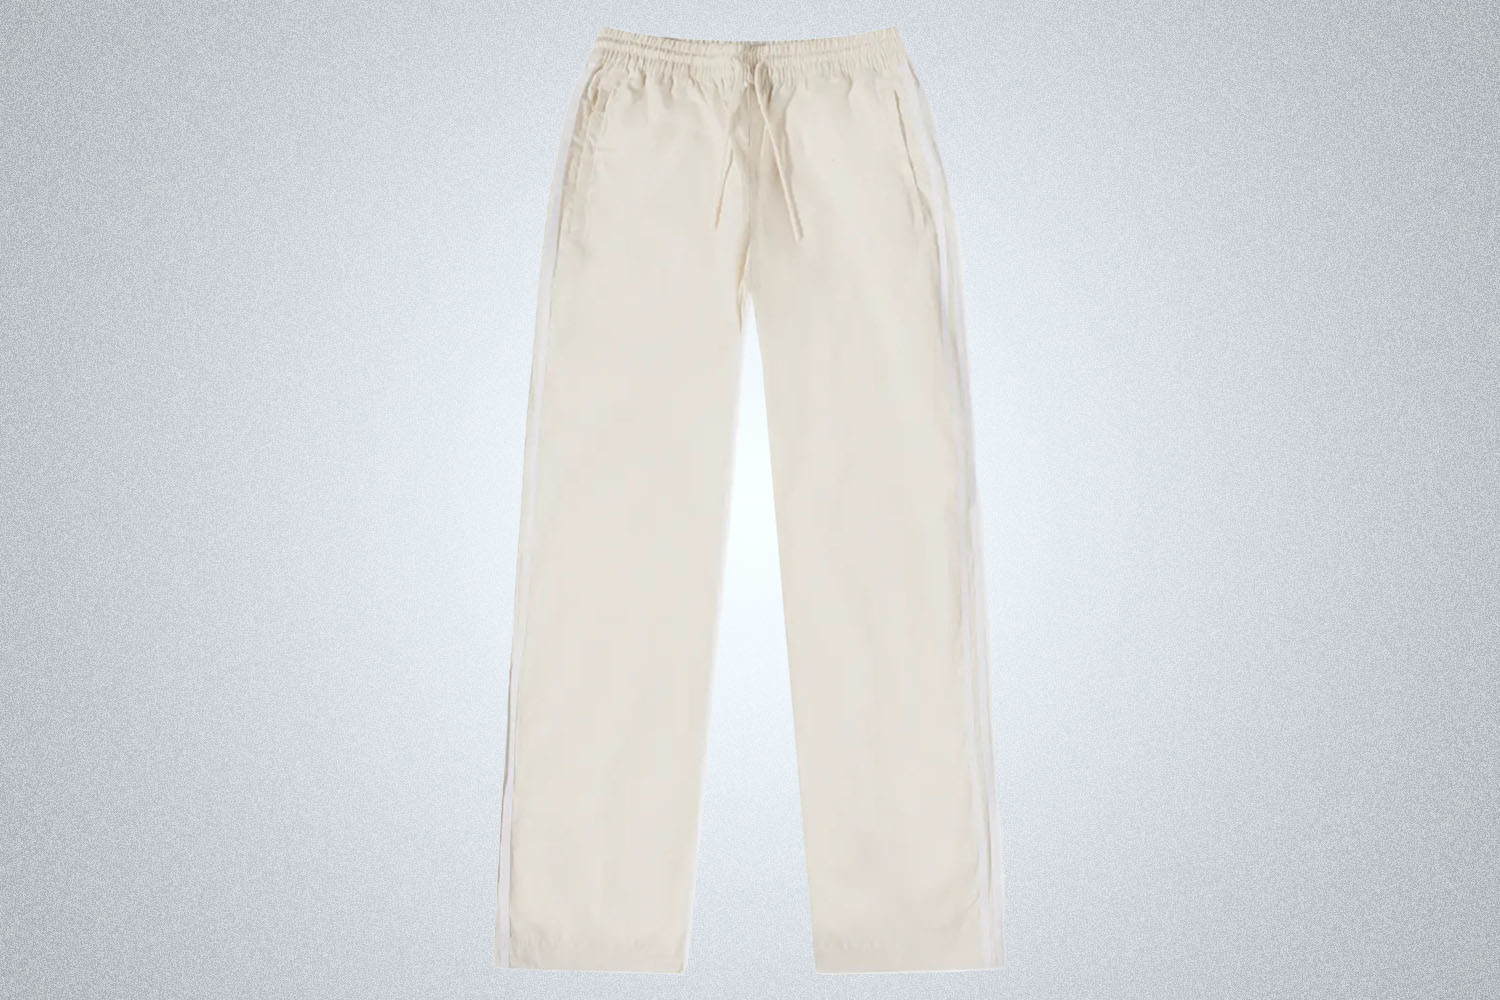 Empyre Loose Fit Sk8 Cord Pants  buy at Blue Tomato